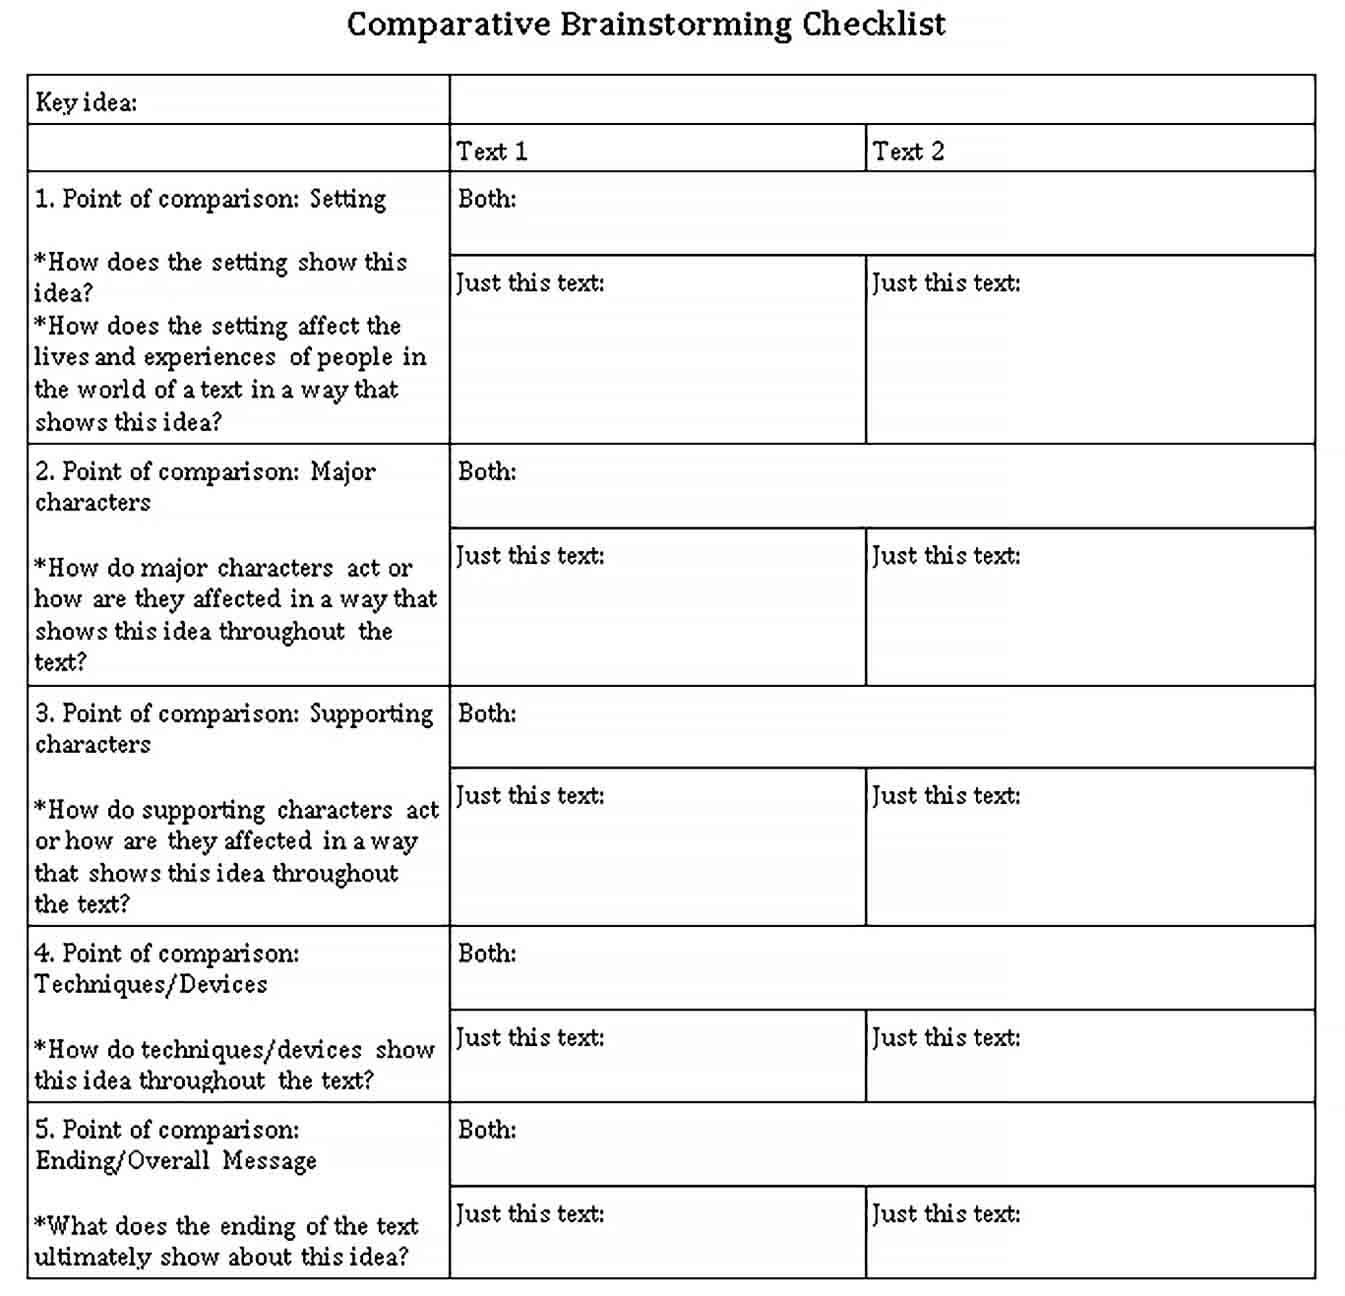 Sample Comparative Brainstorming Checklist Template